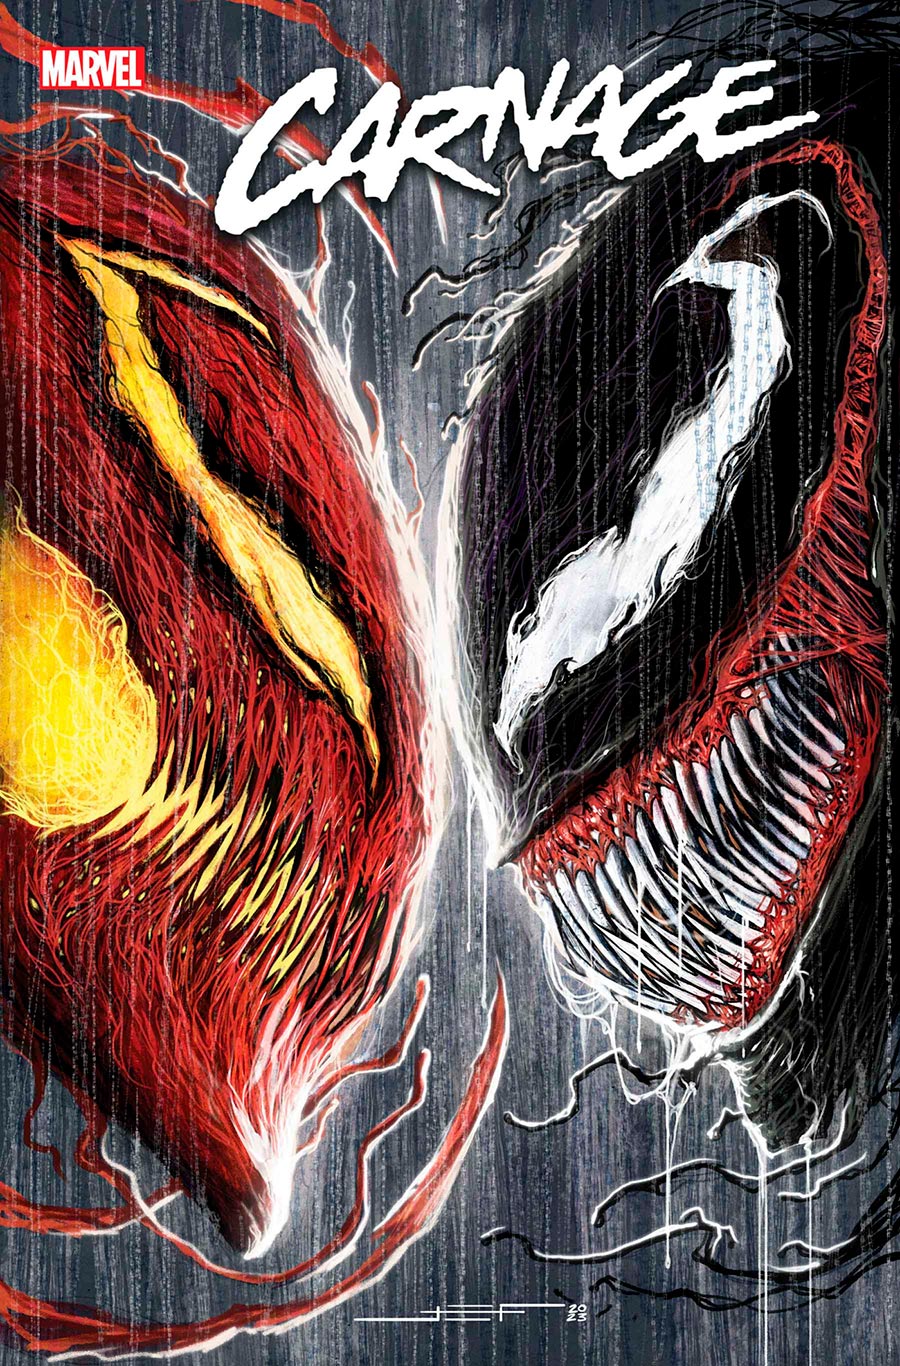 Carnage Vol 4 #5 Cover A Regular Juan Ferreyra Cover (Flesh And Blood Part 2)